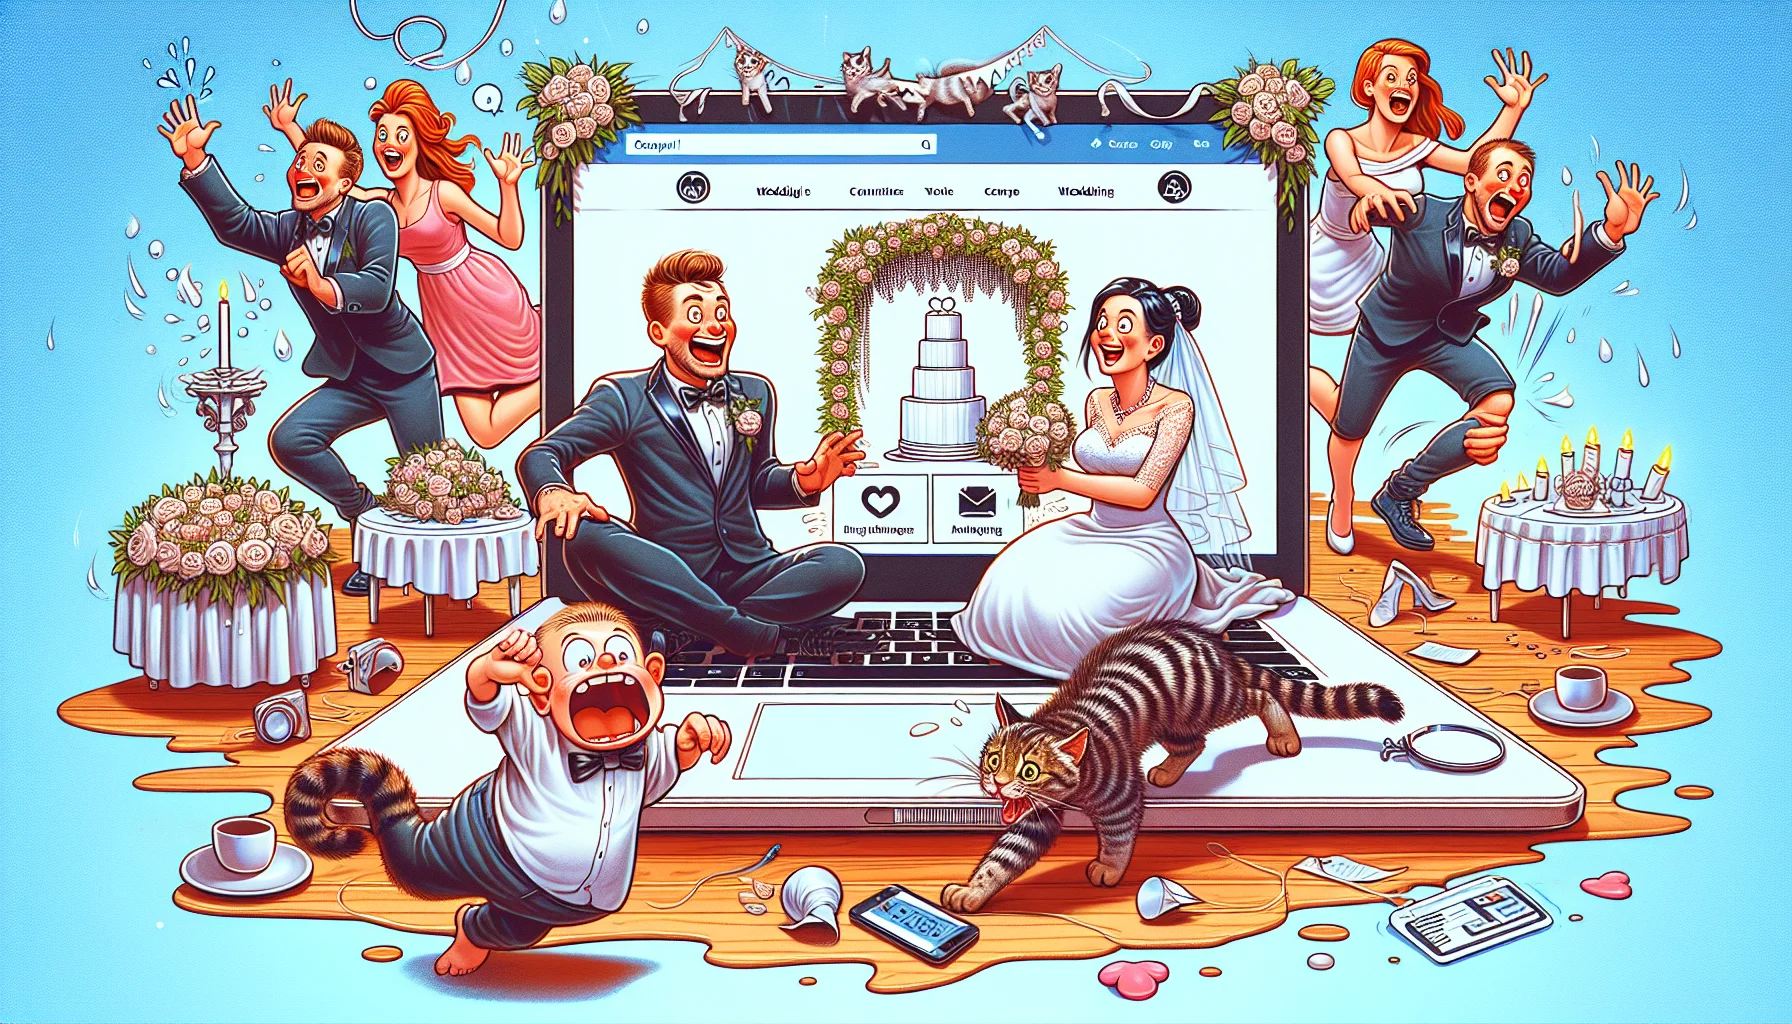 Visualize a comical scene portraying a hypothetical wedding embellished by the use of a well-known web hosting service. It includes a couple joyfully planning their wedding on a laptop. The screen displays a beautifully designed website with matrimonial themes and a countdown to the big day. Additionally, there's a confused but adorable tottering ring bearer, a cat chasing its tail inconveniently sitting on the keyboard, and an overly excited bride-to-be who is accidently pouring her coffee on the caps lock key. The scene radiates the crazy yet joyful charm of wedding preparations.